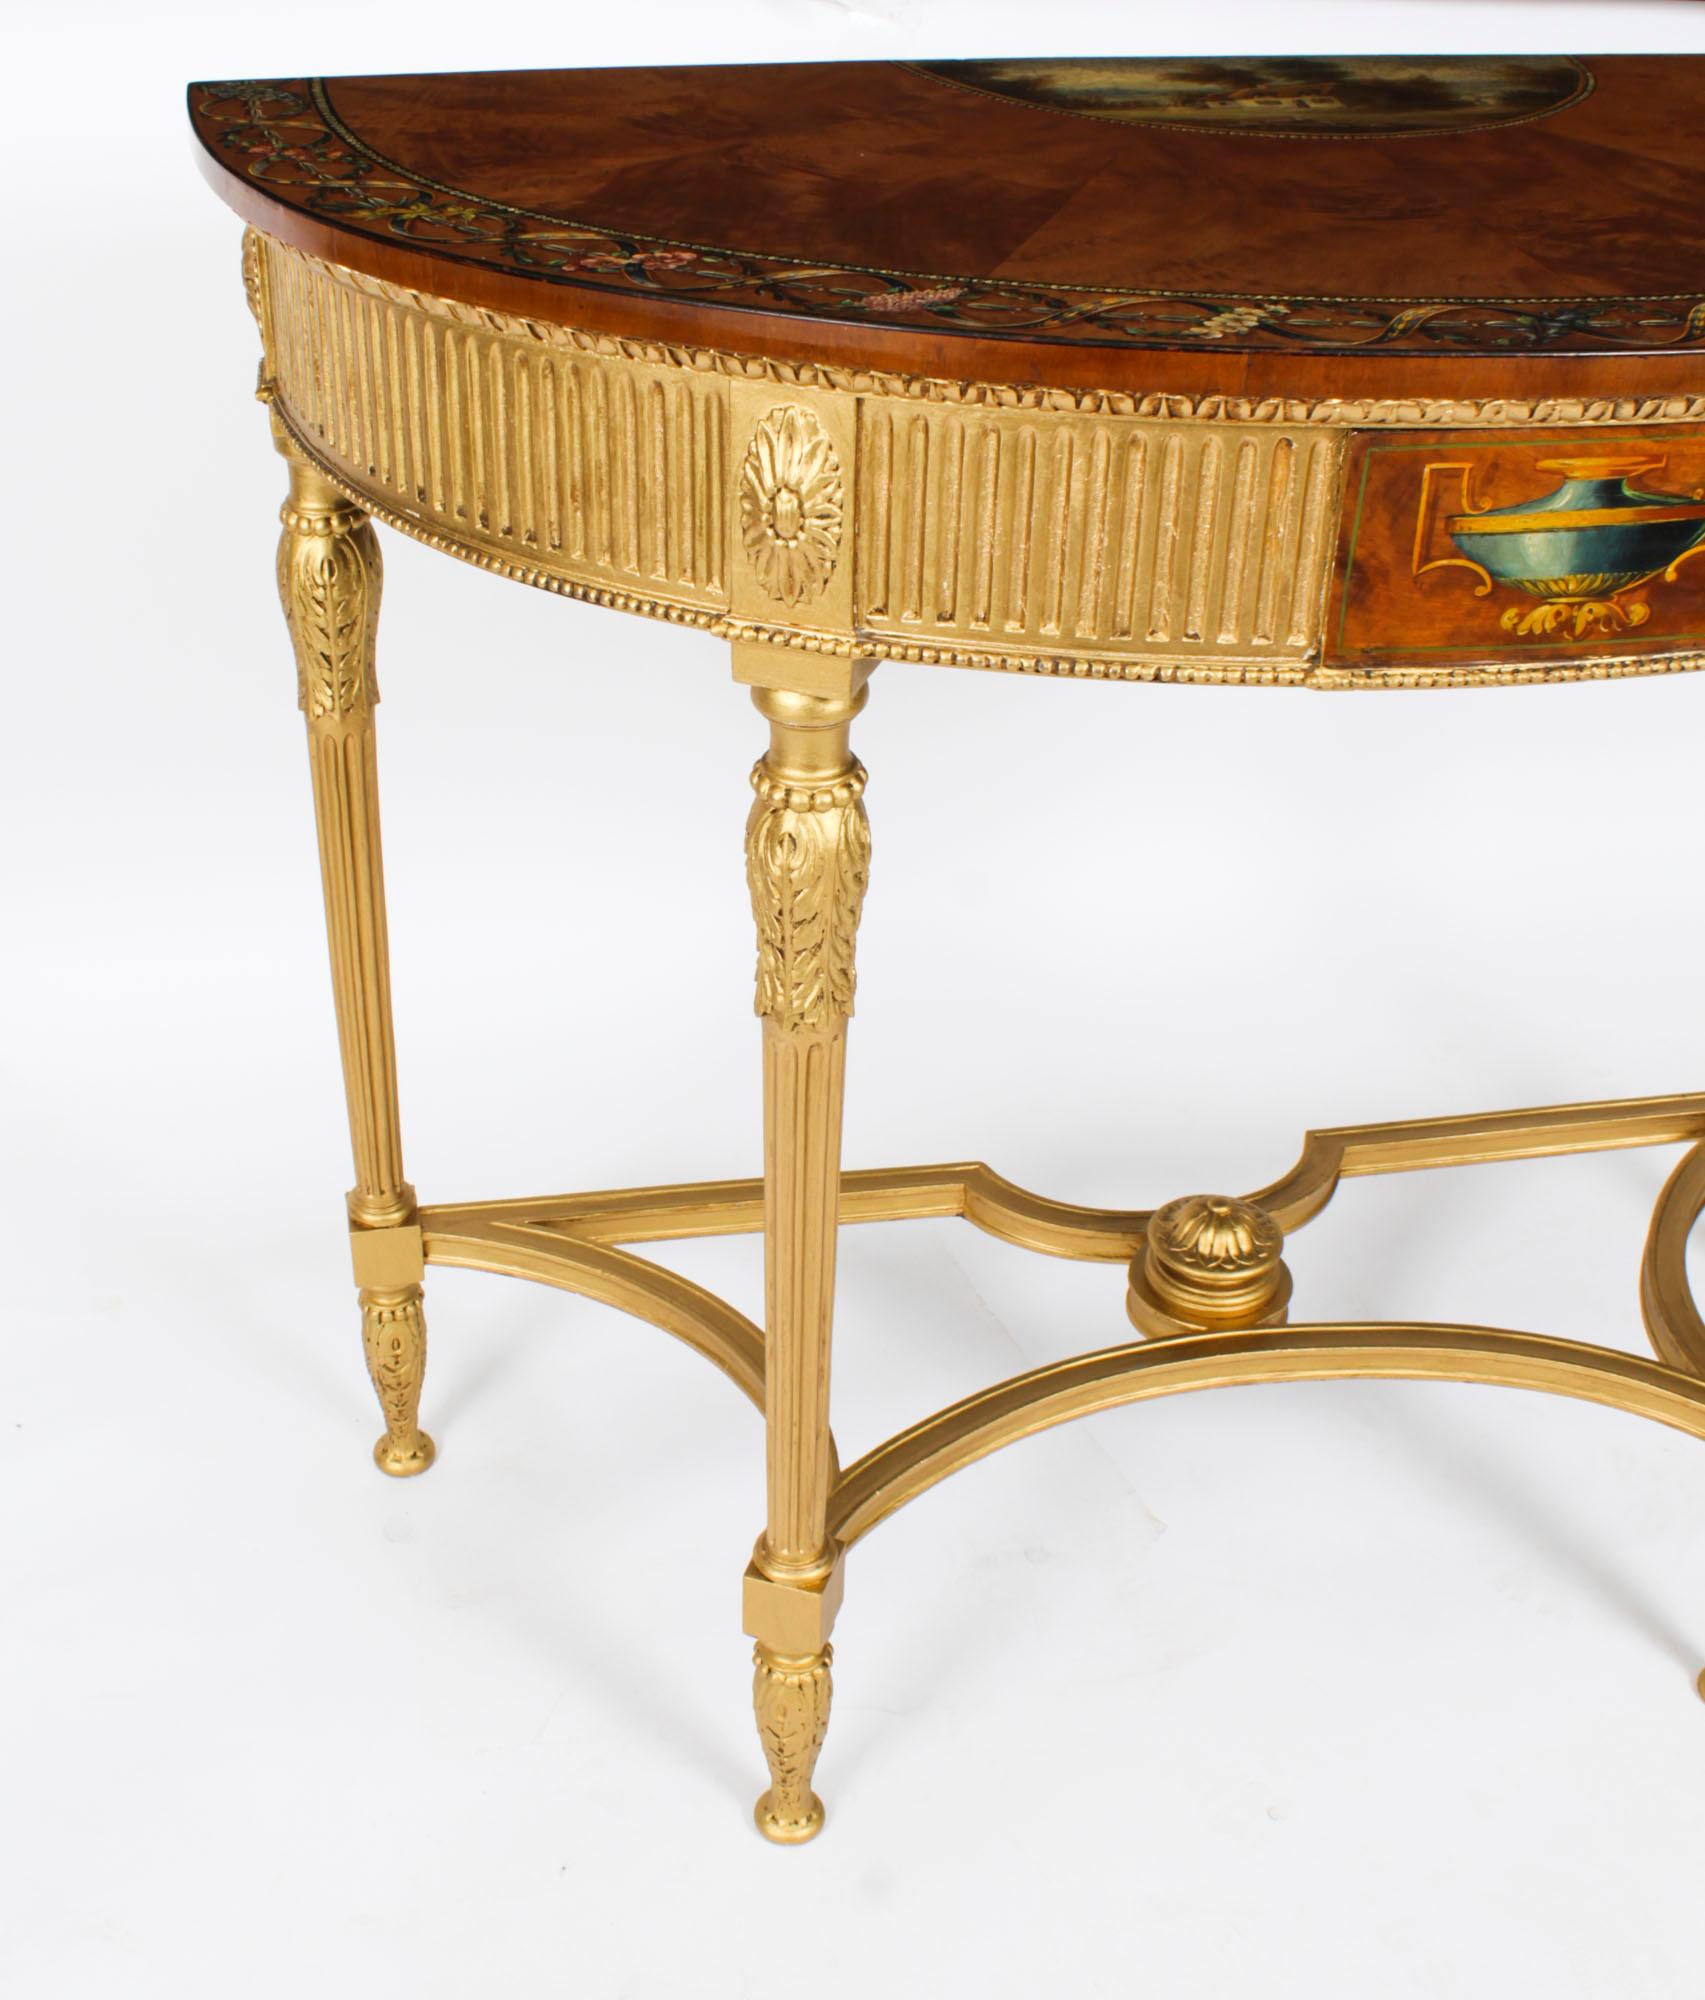 Antique Satinwood Hand Painted Demi-Lune Console Table 19th Century For Sale 5